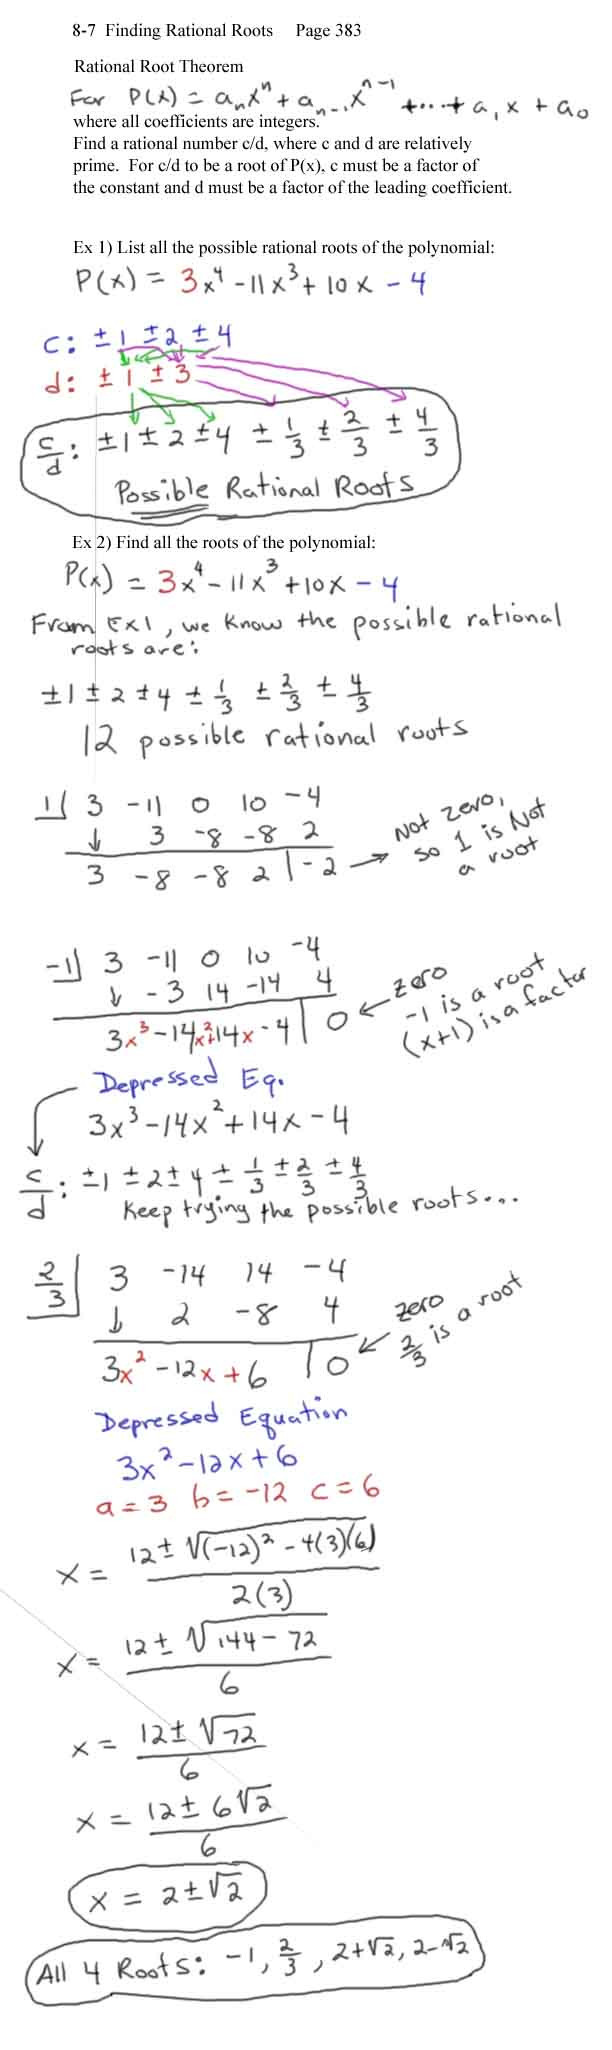 Solving Polynomial Equations Worksheet Answers 34 solving Polynomial Equations Worksheet Answers